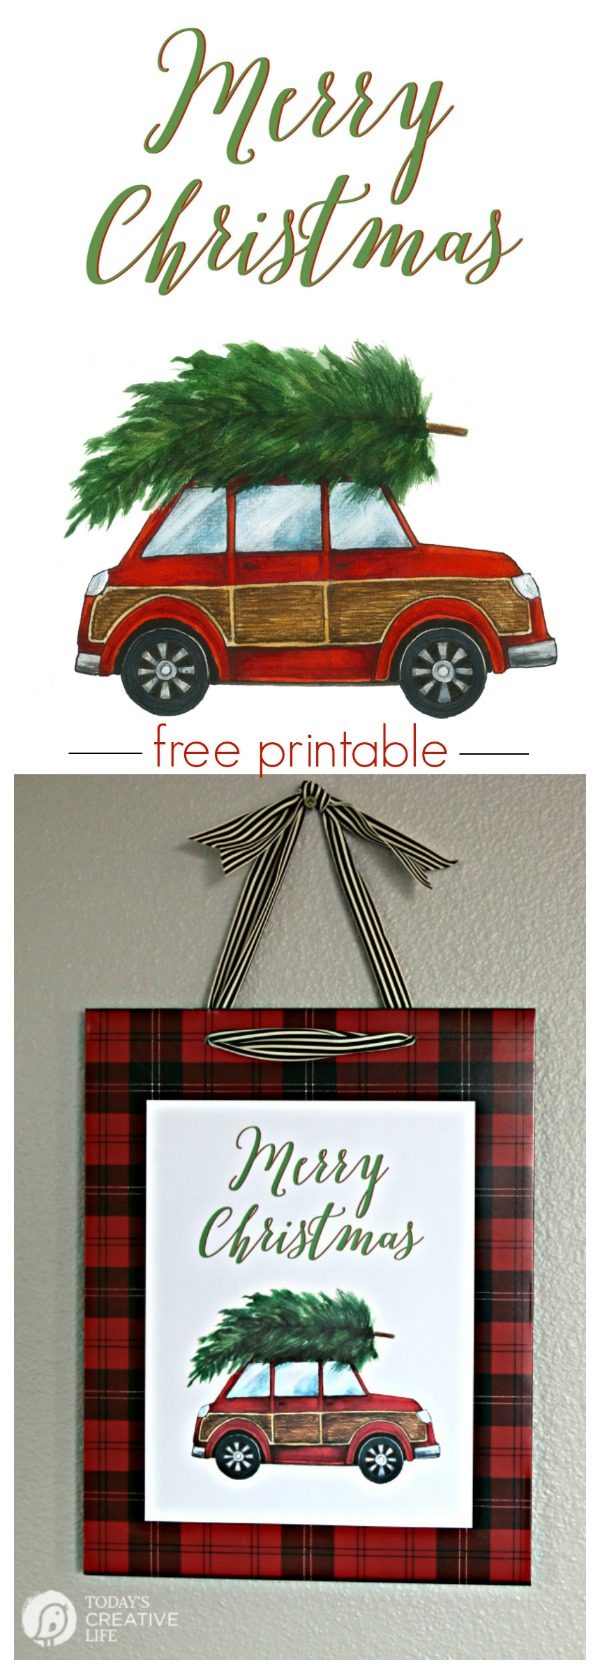 DIY Christmas Decorations | Quick, easy and inexpensive holiday decor with this free printable. Frame it for quick diy wall decor. This adorable red car with a Christmas tree will be your favorite for years to come. Grab yours on Today's Creative Life